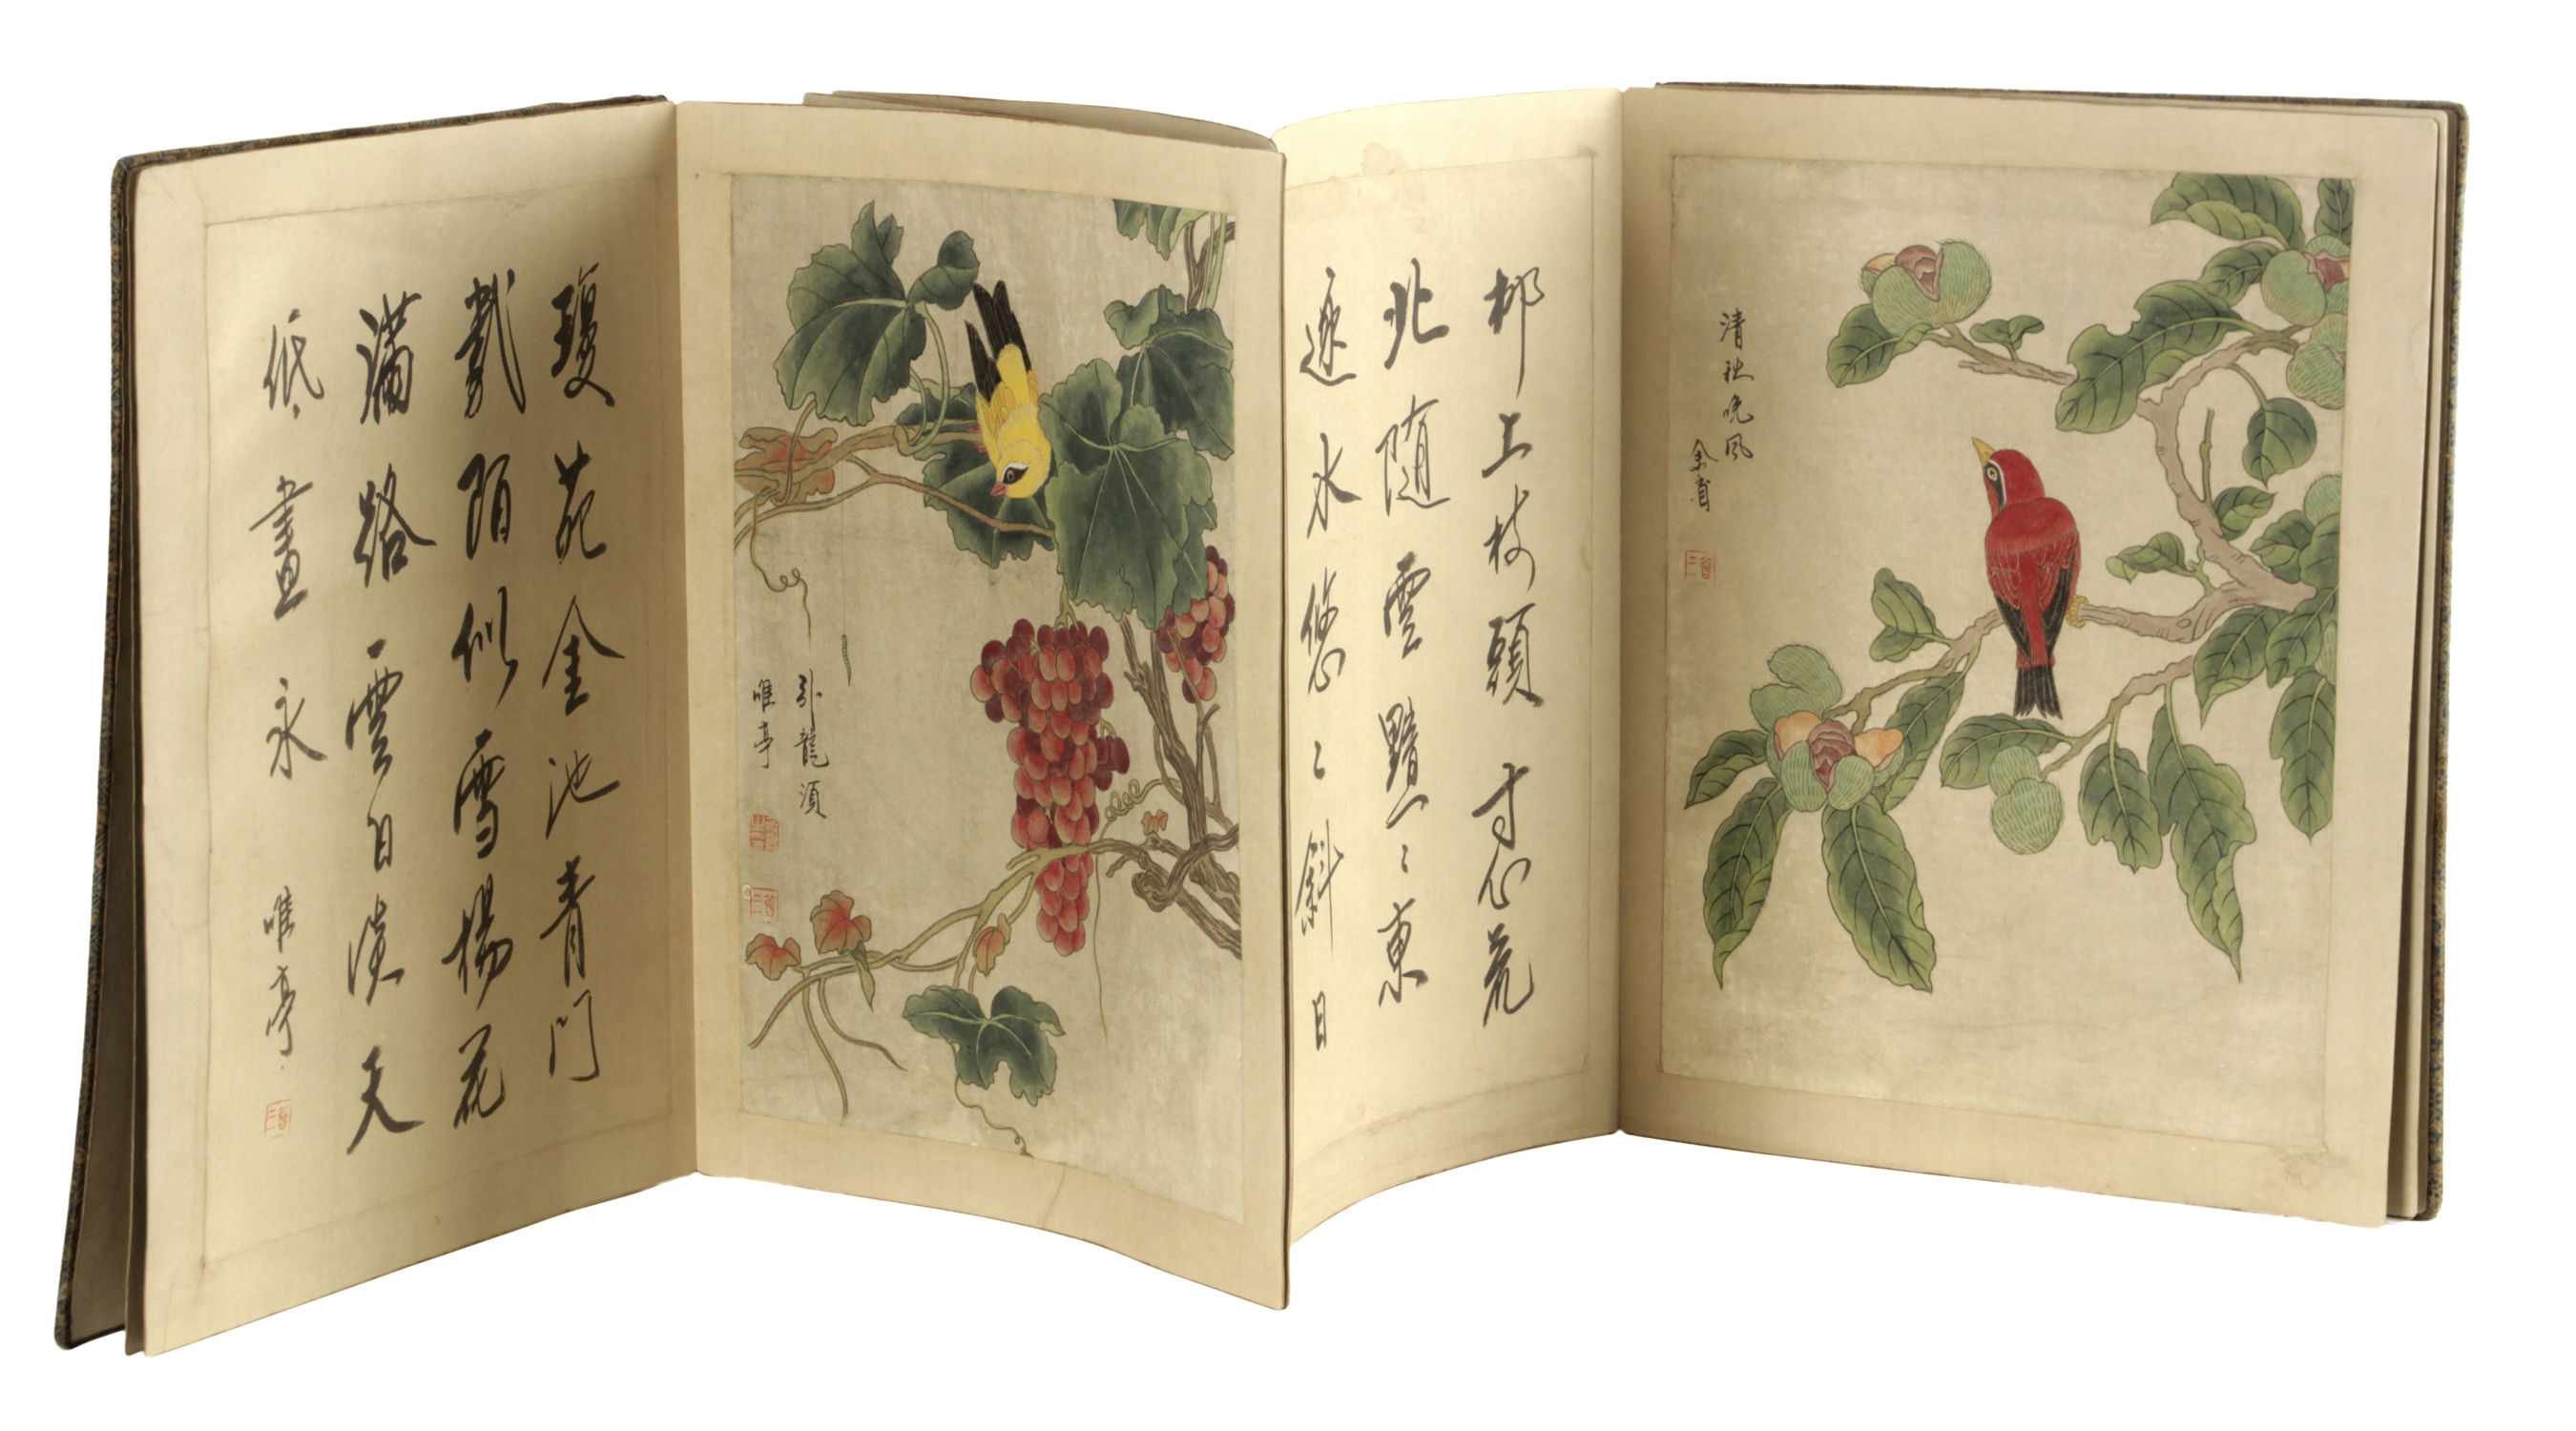 A 20th century Chinese stamps album